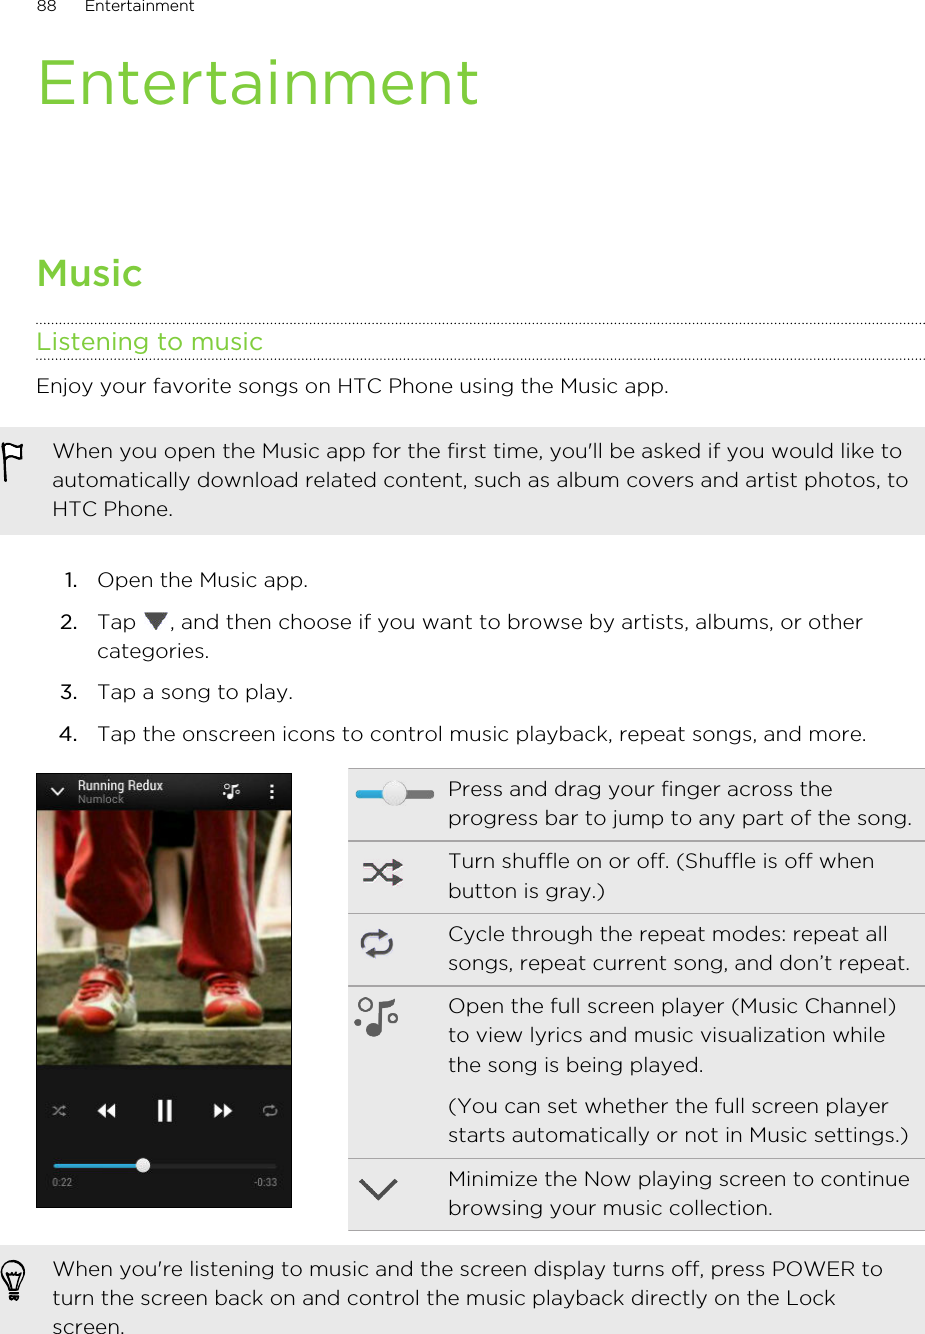 EntertainmentMusicListening to musicEnjoy your favorite songs on HTC Phone using the Music app.When you open the Music app for the first time, you&apos;ll be asked if you would like toautomatically download related content, such as album covers and artist photos, toHTC Phone.1. Open the Music app.2. Tap  , and then choose if you want to browse by artists, albums, or othercategories.3. Tap a song to play.4. Tap the onscreen icons to control music playback, repeat songs, and more.Press and drag your finger across theprogress bar to jump to any part of the song.Turn shuffle on or off. (Shuffle is off whenbutton is gray.)Cycle through the repeat modes: repeat allsongs, repeat current song, and don’t repeat.Open the full screen player (Music Channel)to view lyrics and music visualization whilethe song is being played.(You can set whether the full screen playerstarts automatically or not in Music settings.)Minimize the Now playing screen to continuebrowsing your music collection.When you&apos;re listening to music and the screen display turns off, press POWER toturn the screen back on and control the music playback directly on the Lockscreen.88 Entertainment